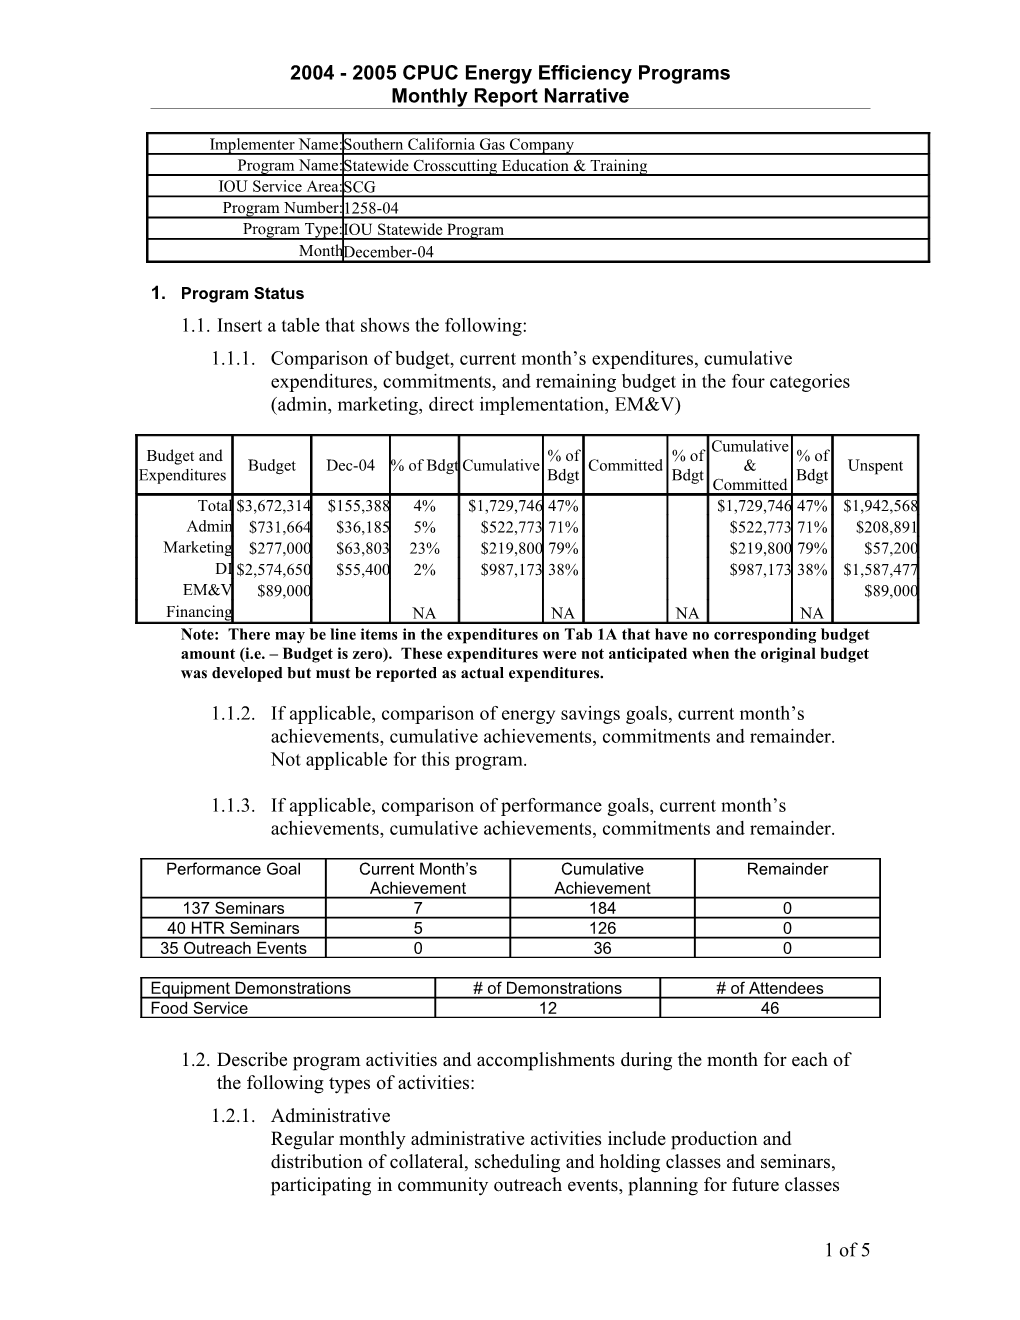 PY 2002 Energy Efficiency Reporting Requirements